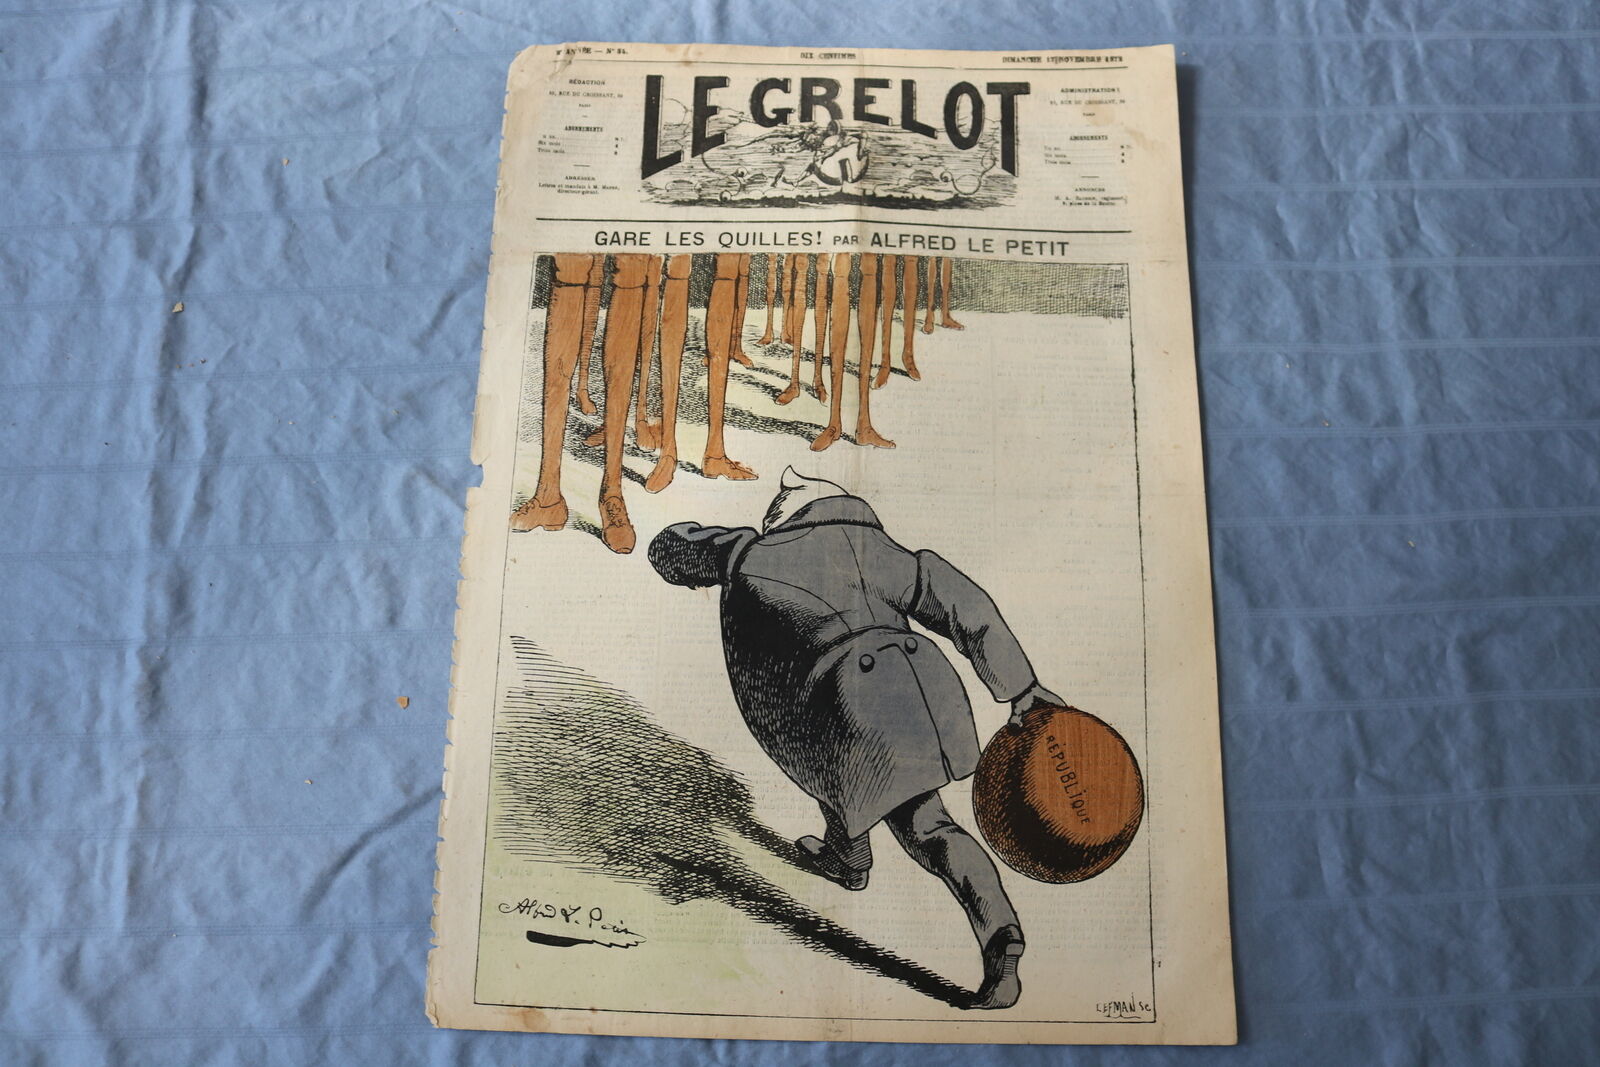 1872 NOVEMBER 17 LE GRELOT NEWSPAPER - GARE LES QUILES - FRENCH - NP 8605